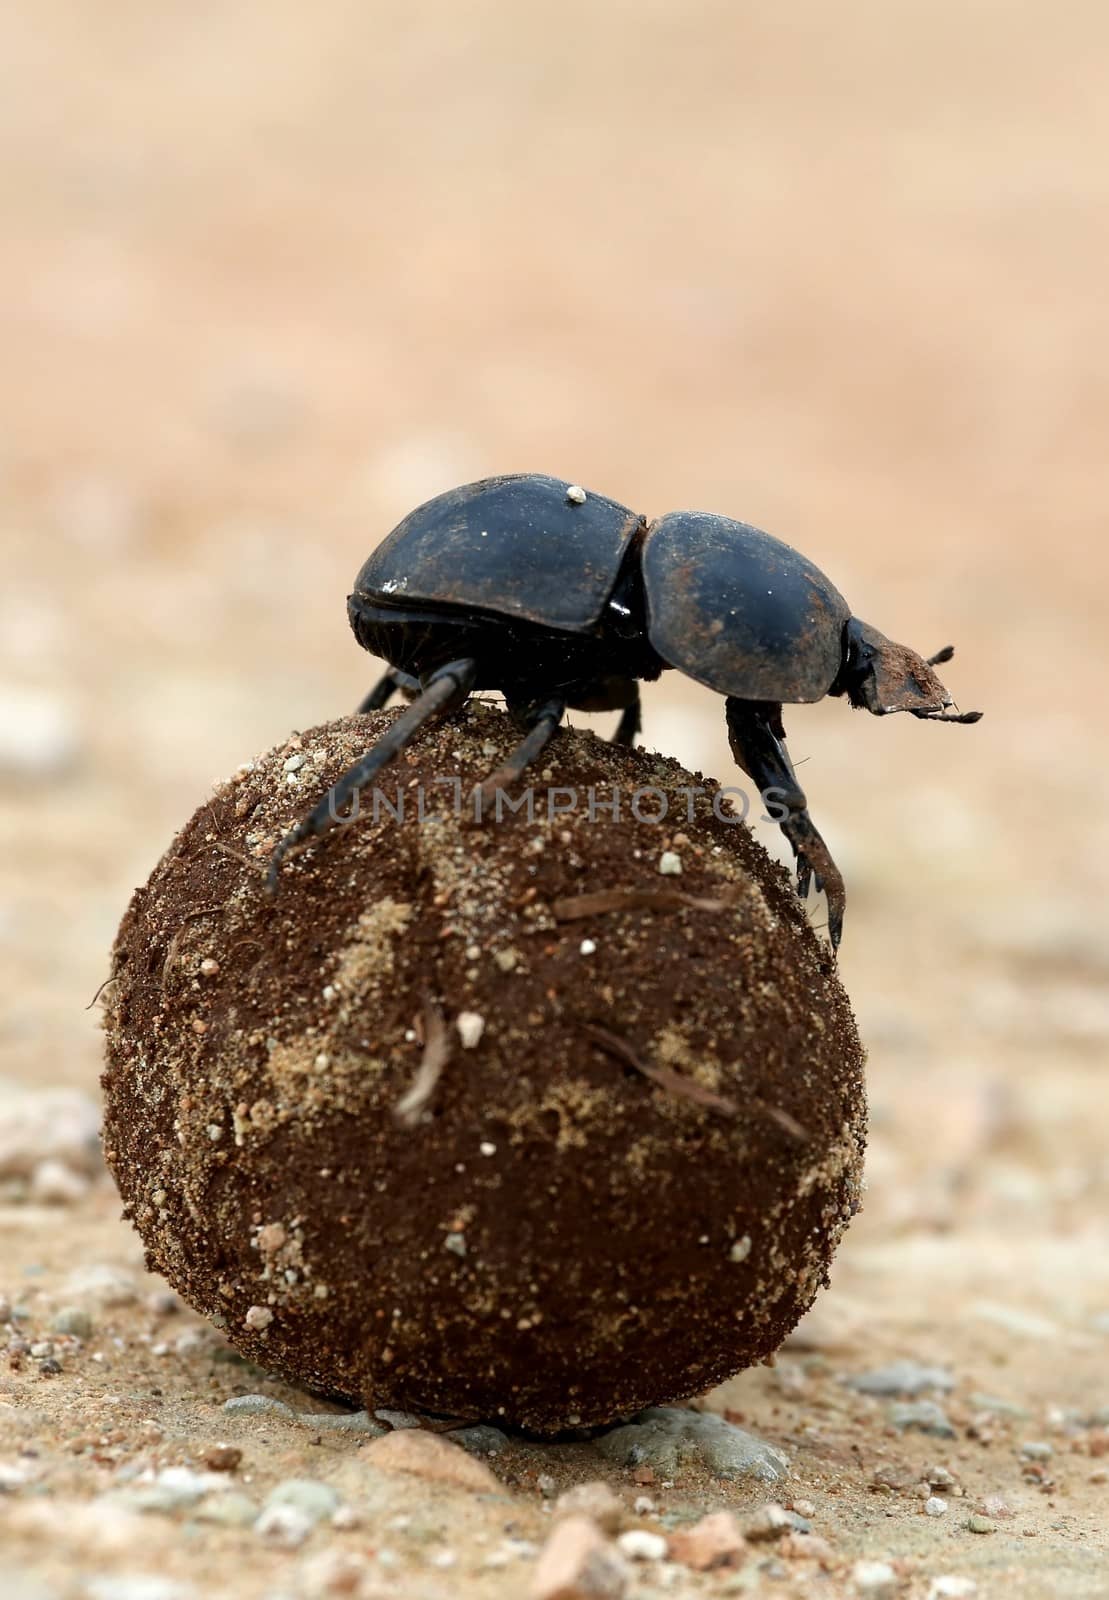 Flighless Dung Beetle Rolling Dung Ball by fouroaks